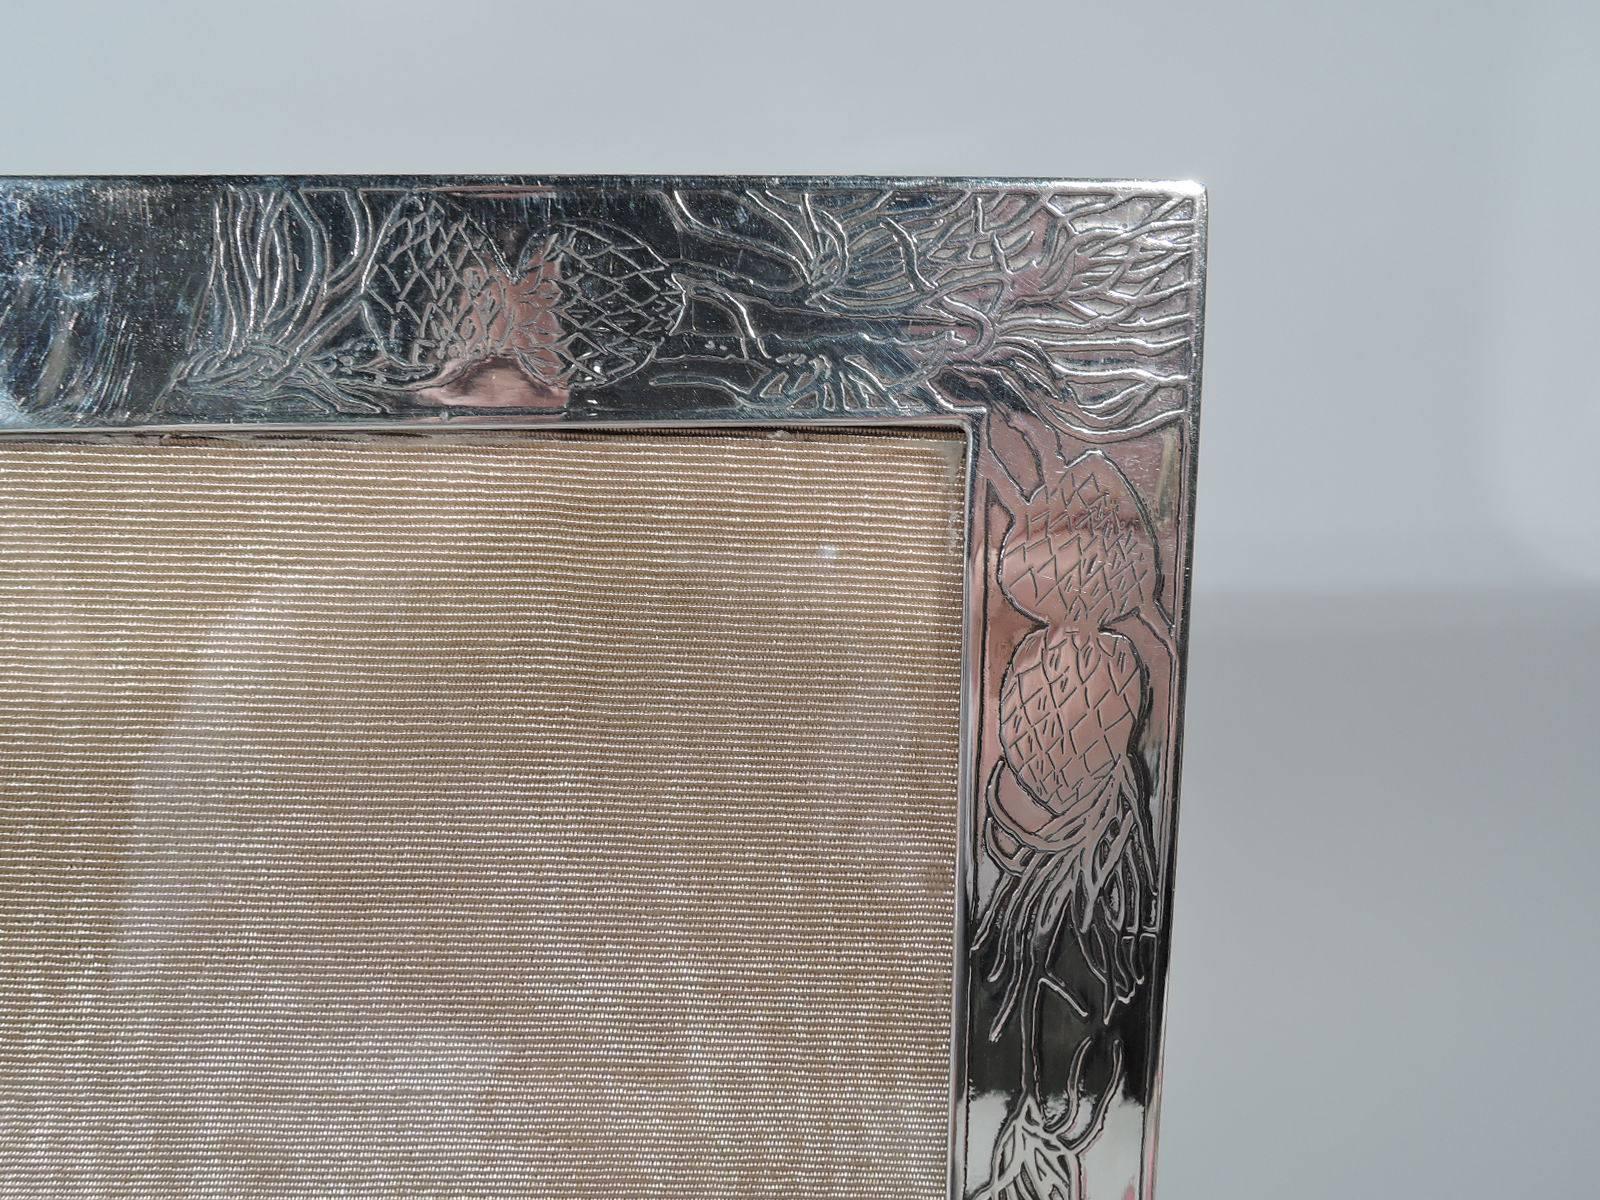 Art Nouveau sterling silver picture frame. Made by Tiffany & Co. in New York. Rectangular window with acid-etched surround and sides: Hallucinatory, semi-abstract ornament in form of vegetation joined by dense and interlaced tendrils. With glass,